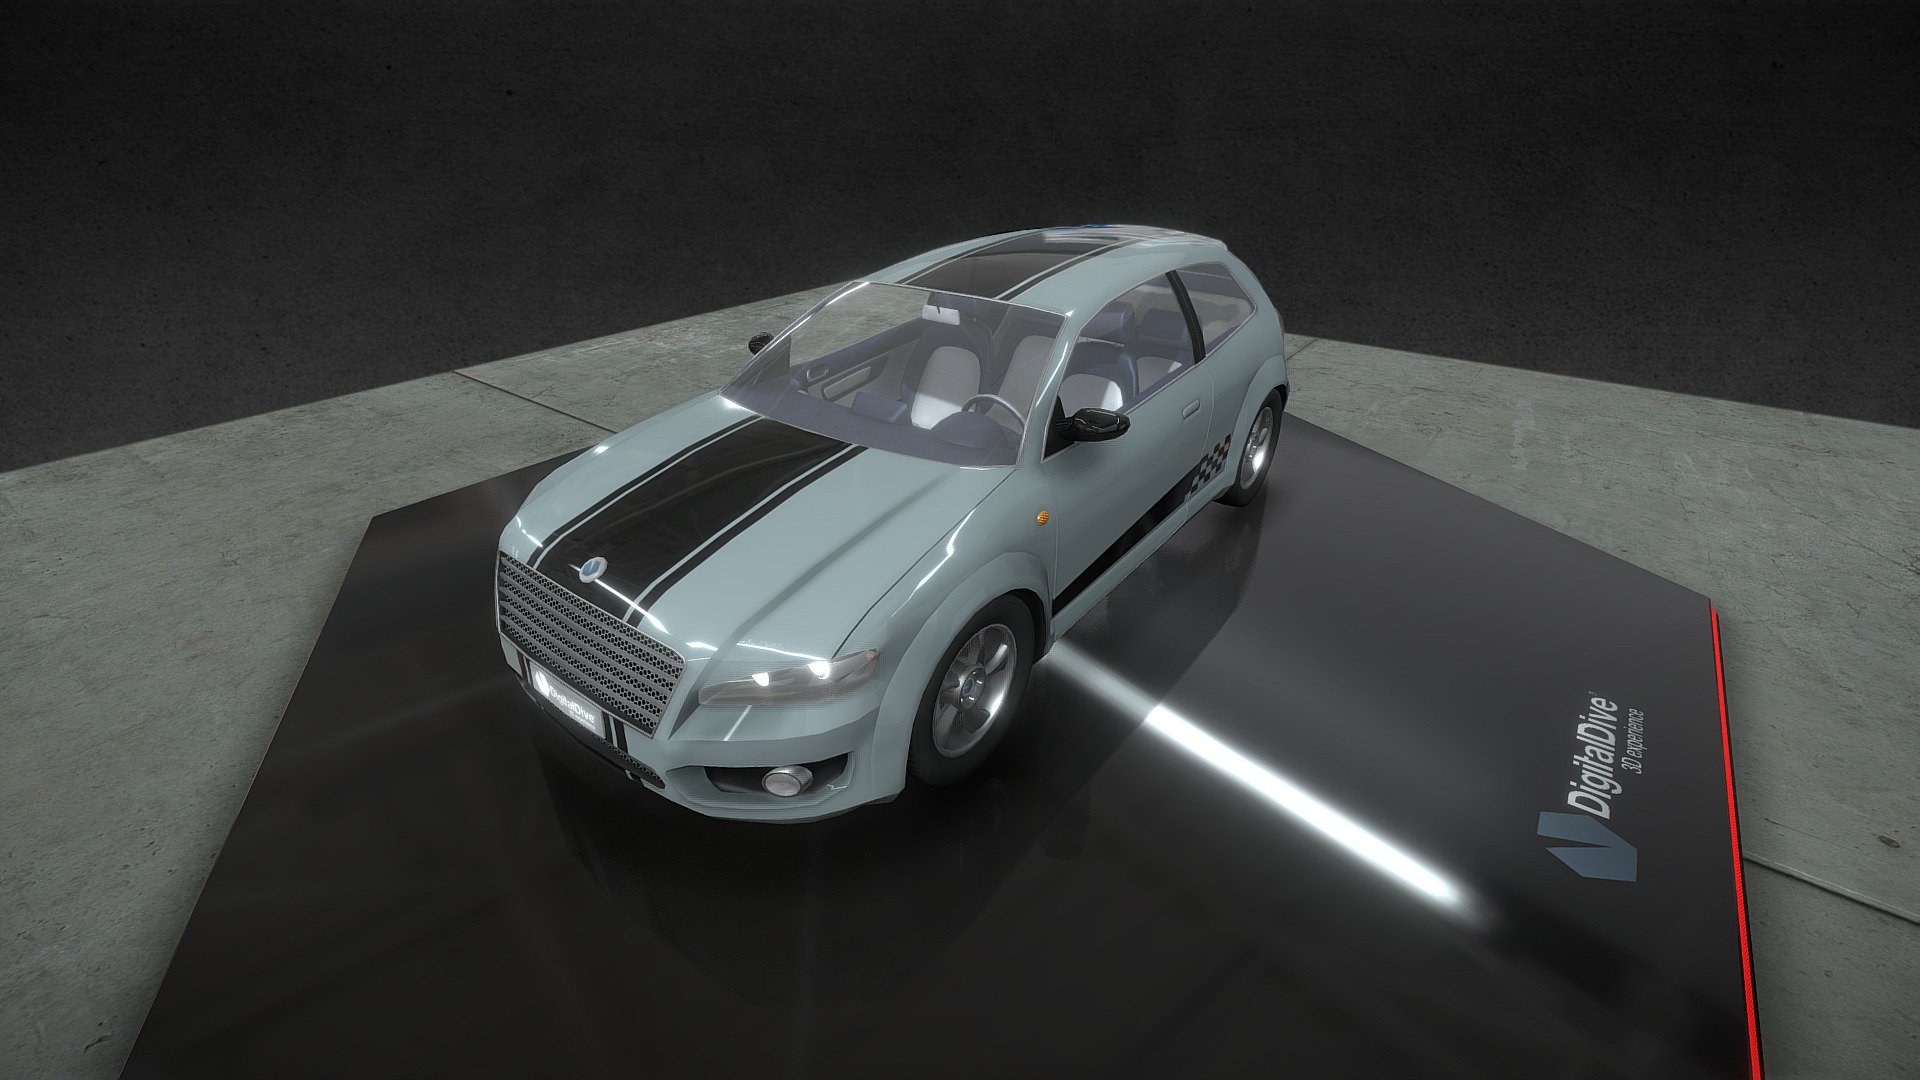 Hatchback car from our Drivable Cars Series in Unreal Engine 4 marketplace. The car is fully rigged with animated parts and detailed exterior and interior.
All materials on different IDs so you can customize your car as you wish.
Includes two UVW channels (1 for tiling and 2 for unwrapped). Will upload custom paints soon

See all our cars in action here: https://www.youtube.com/watch?v=xdDQU8KldWQ&amp;list=PLoQ2Y8tP_OaXBBl_WqOwX5Tkr-HLR7fAf

Compatible with Unity and Unreal - Drivable Cars: Hatchback 1 - Buy Royalty Free 3D model by Digital Dive Studio (@digitaldive) 3d model